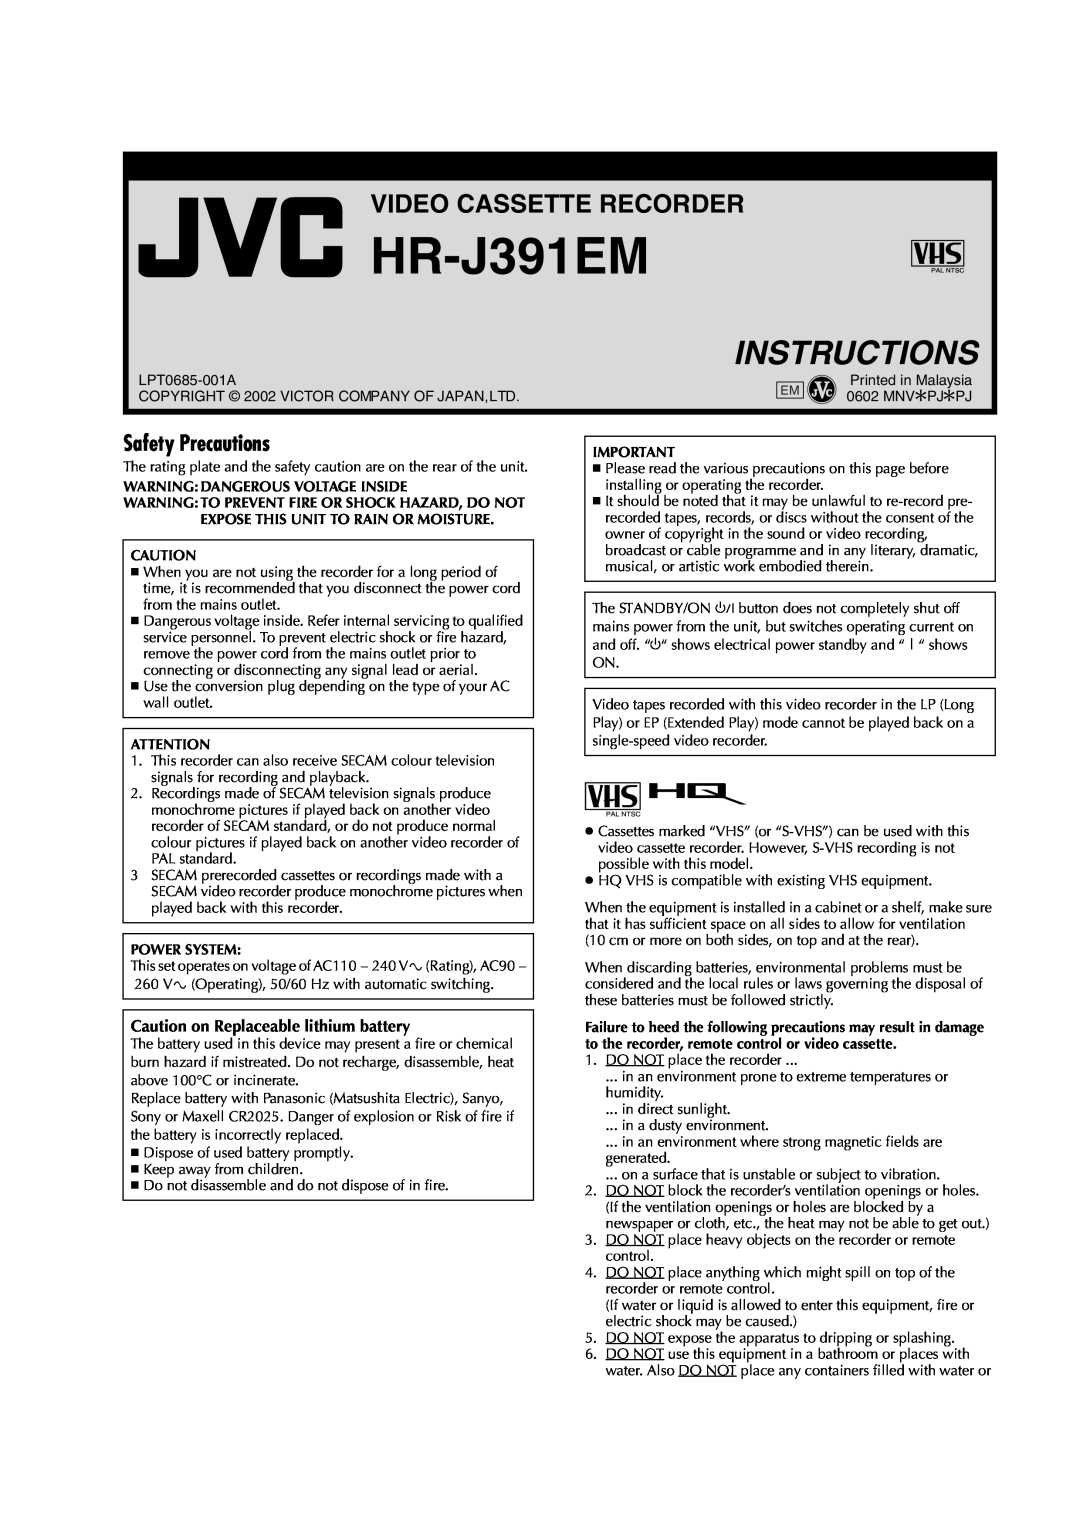 JVC LPT0685-001A manual Safety Precautions, Caution on Replaceable lithium battery, Warning Dangerous Voltage Inside 